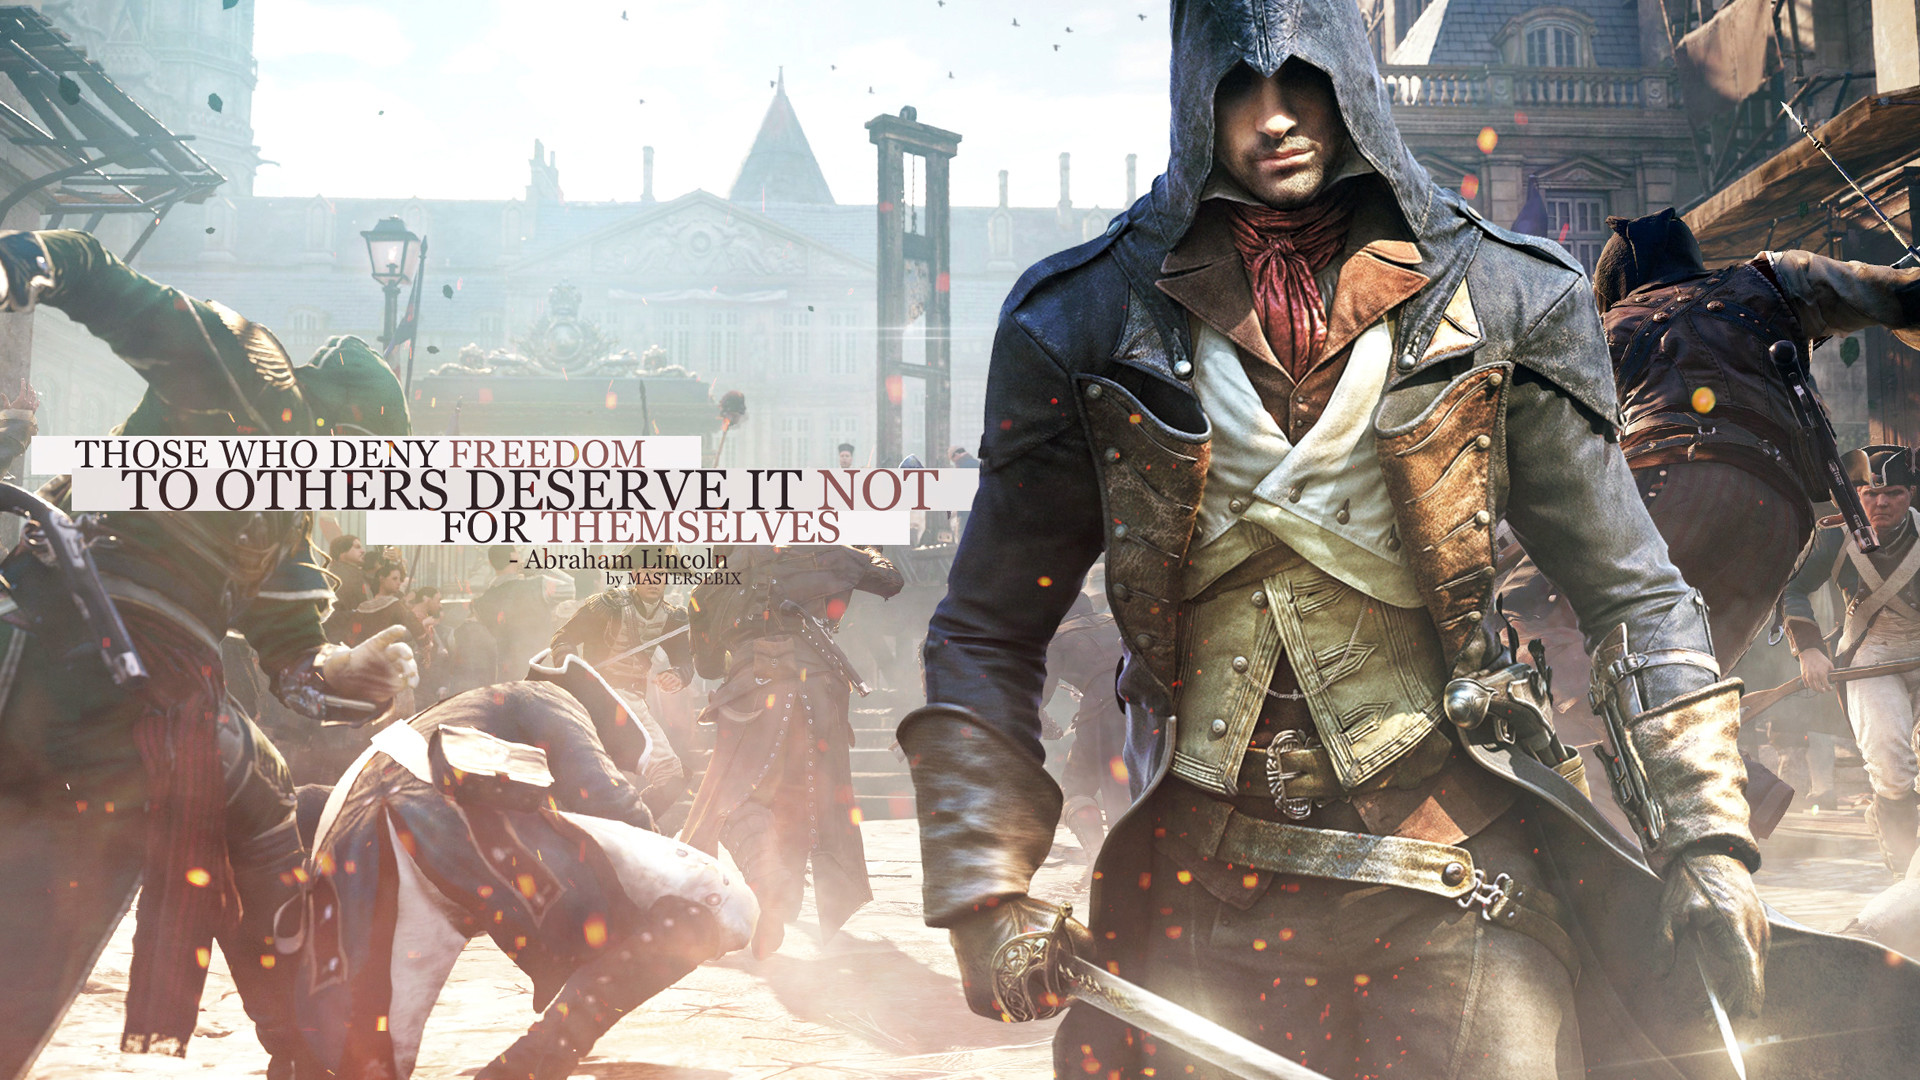 1920x1080 Abraham Lincoln's Quotes - Assassin's Creed Unity HD Wallpaper